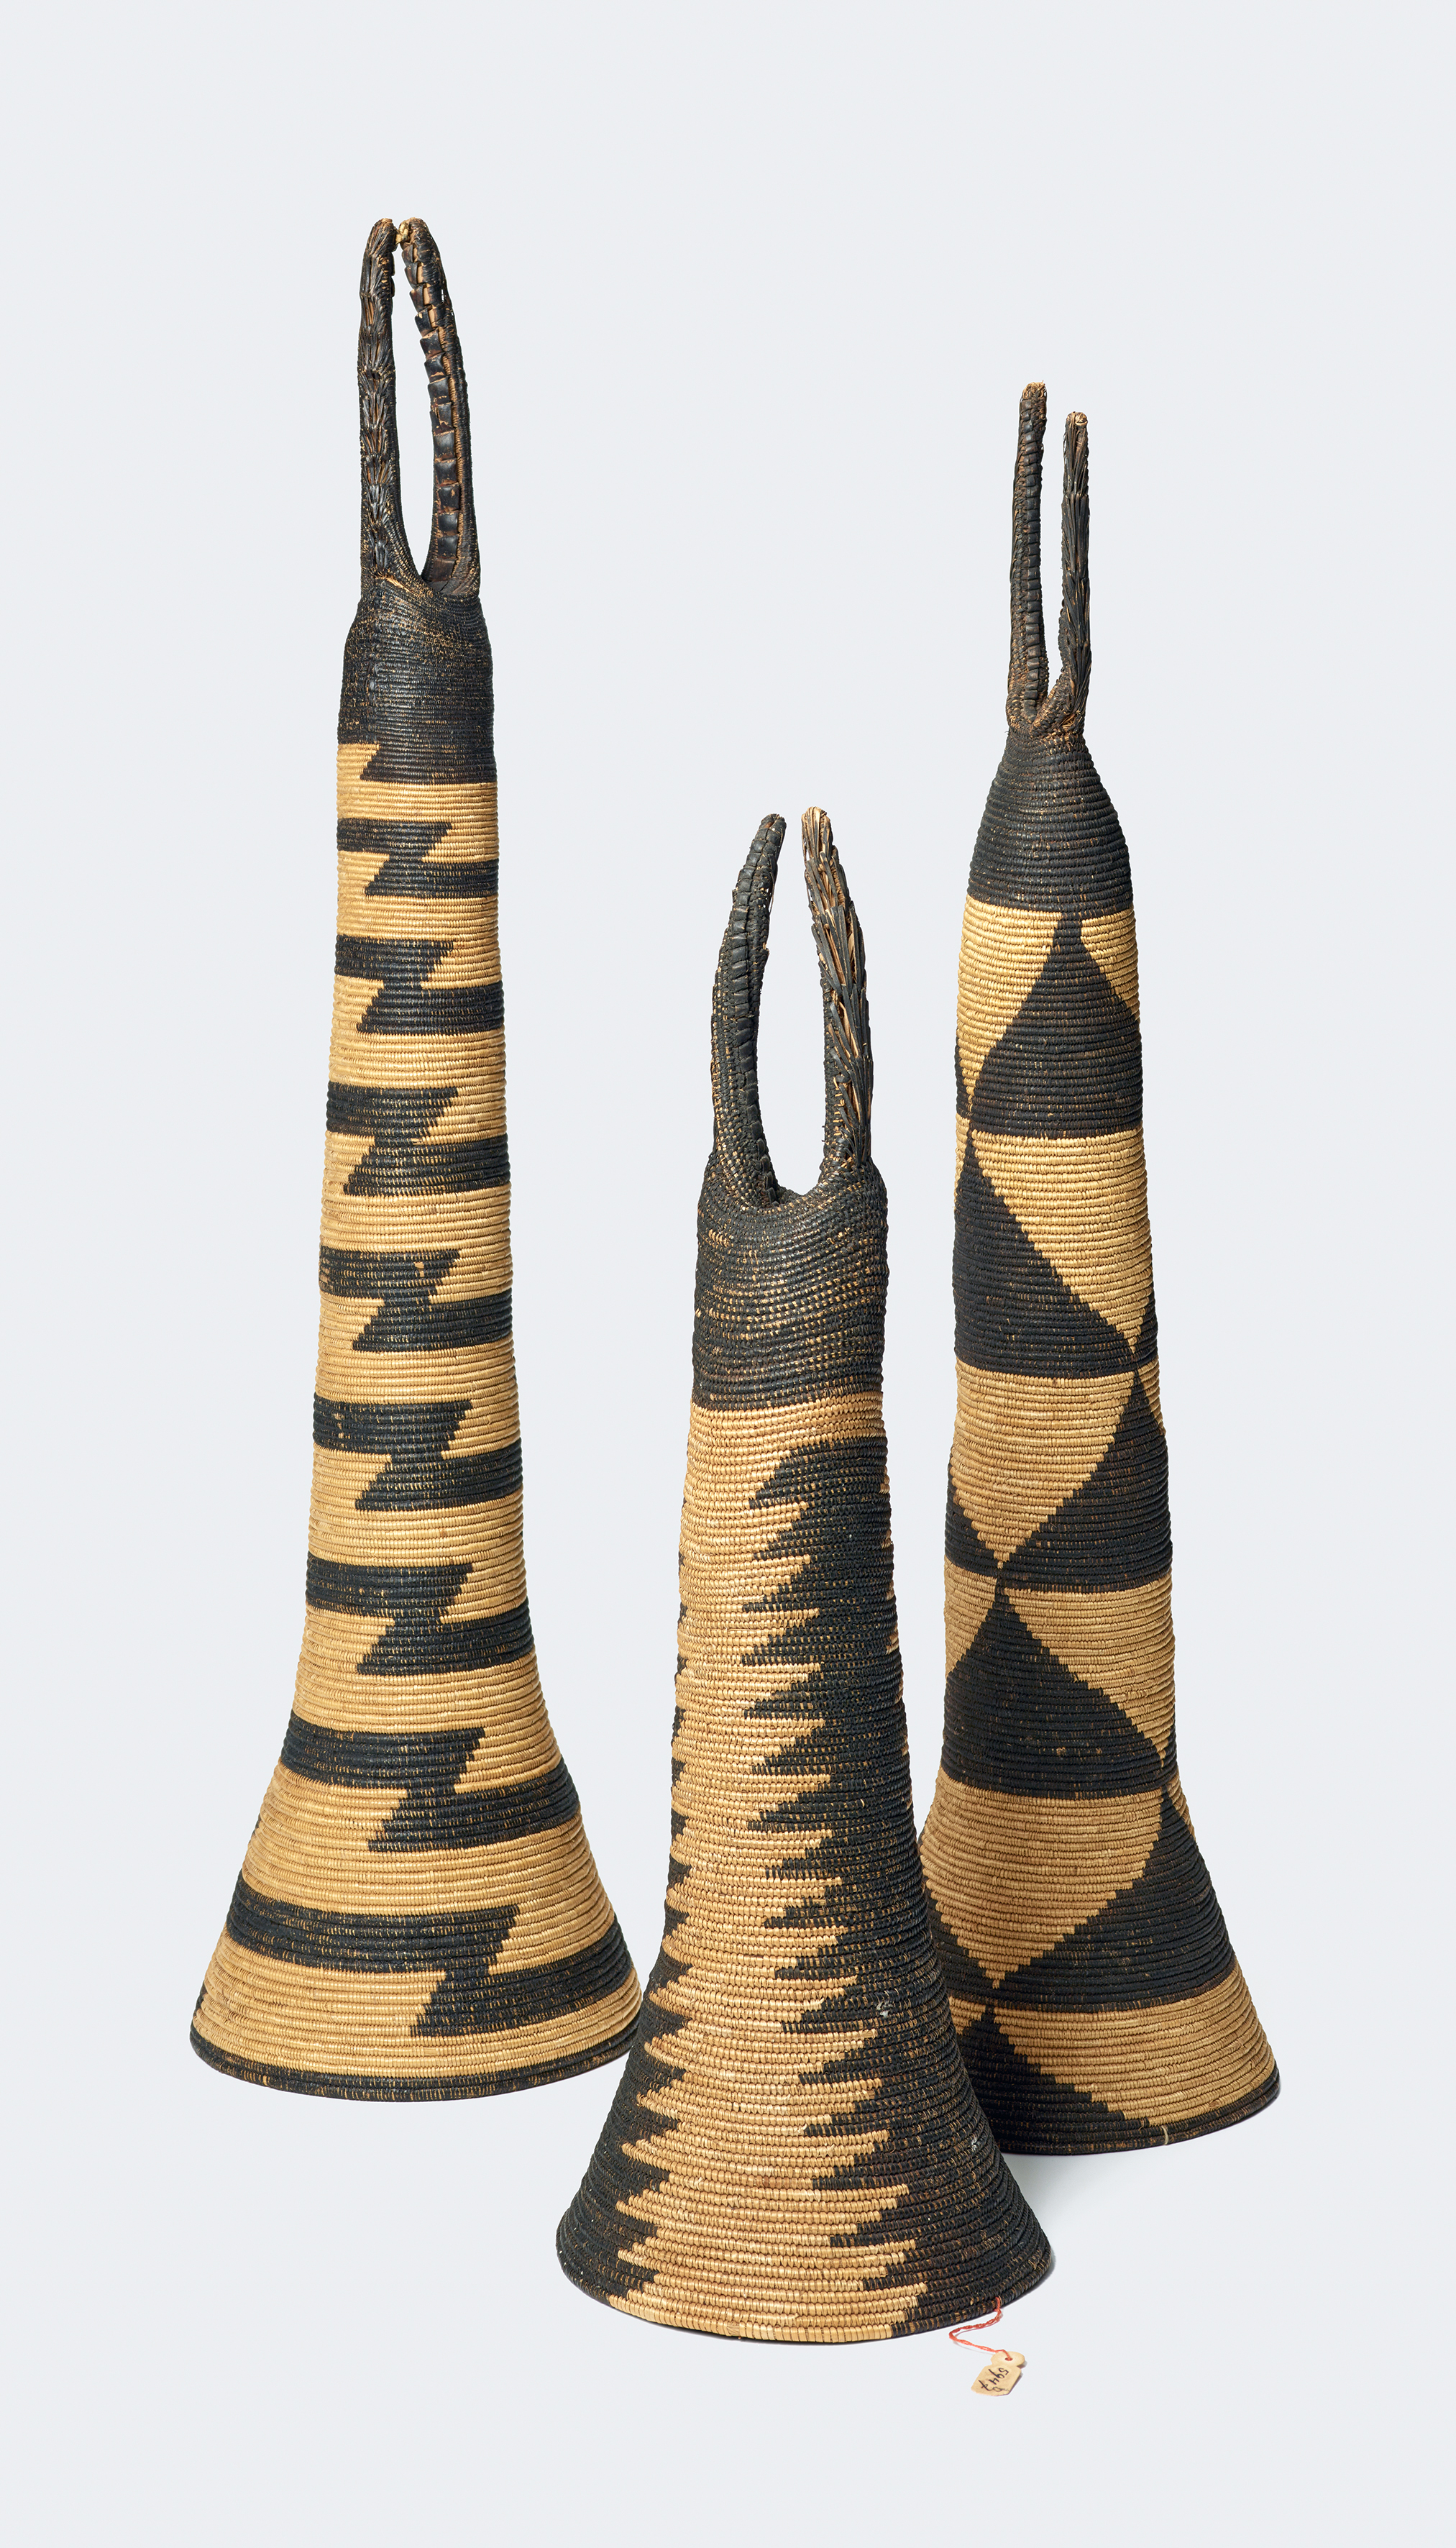 Three woven lids for milk vessels. Collection Ethnographical Museum UZH, inv.no. 05947d, b, c.